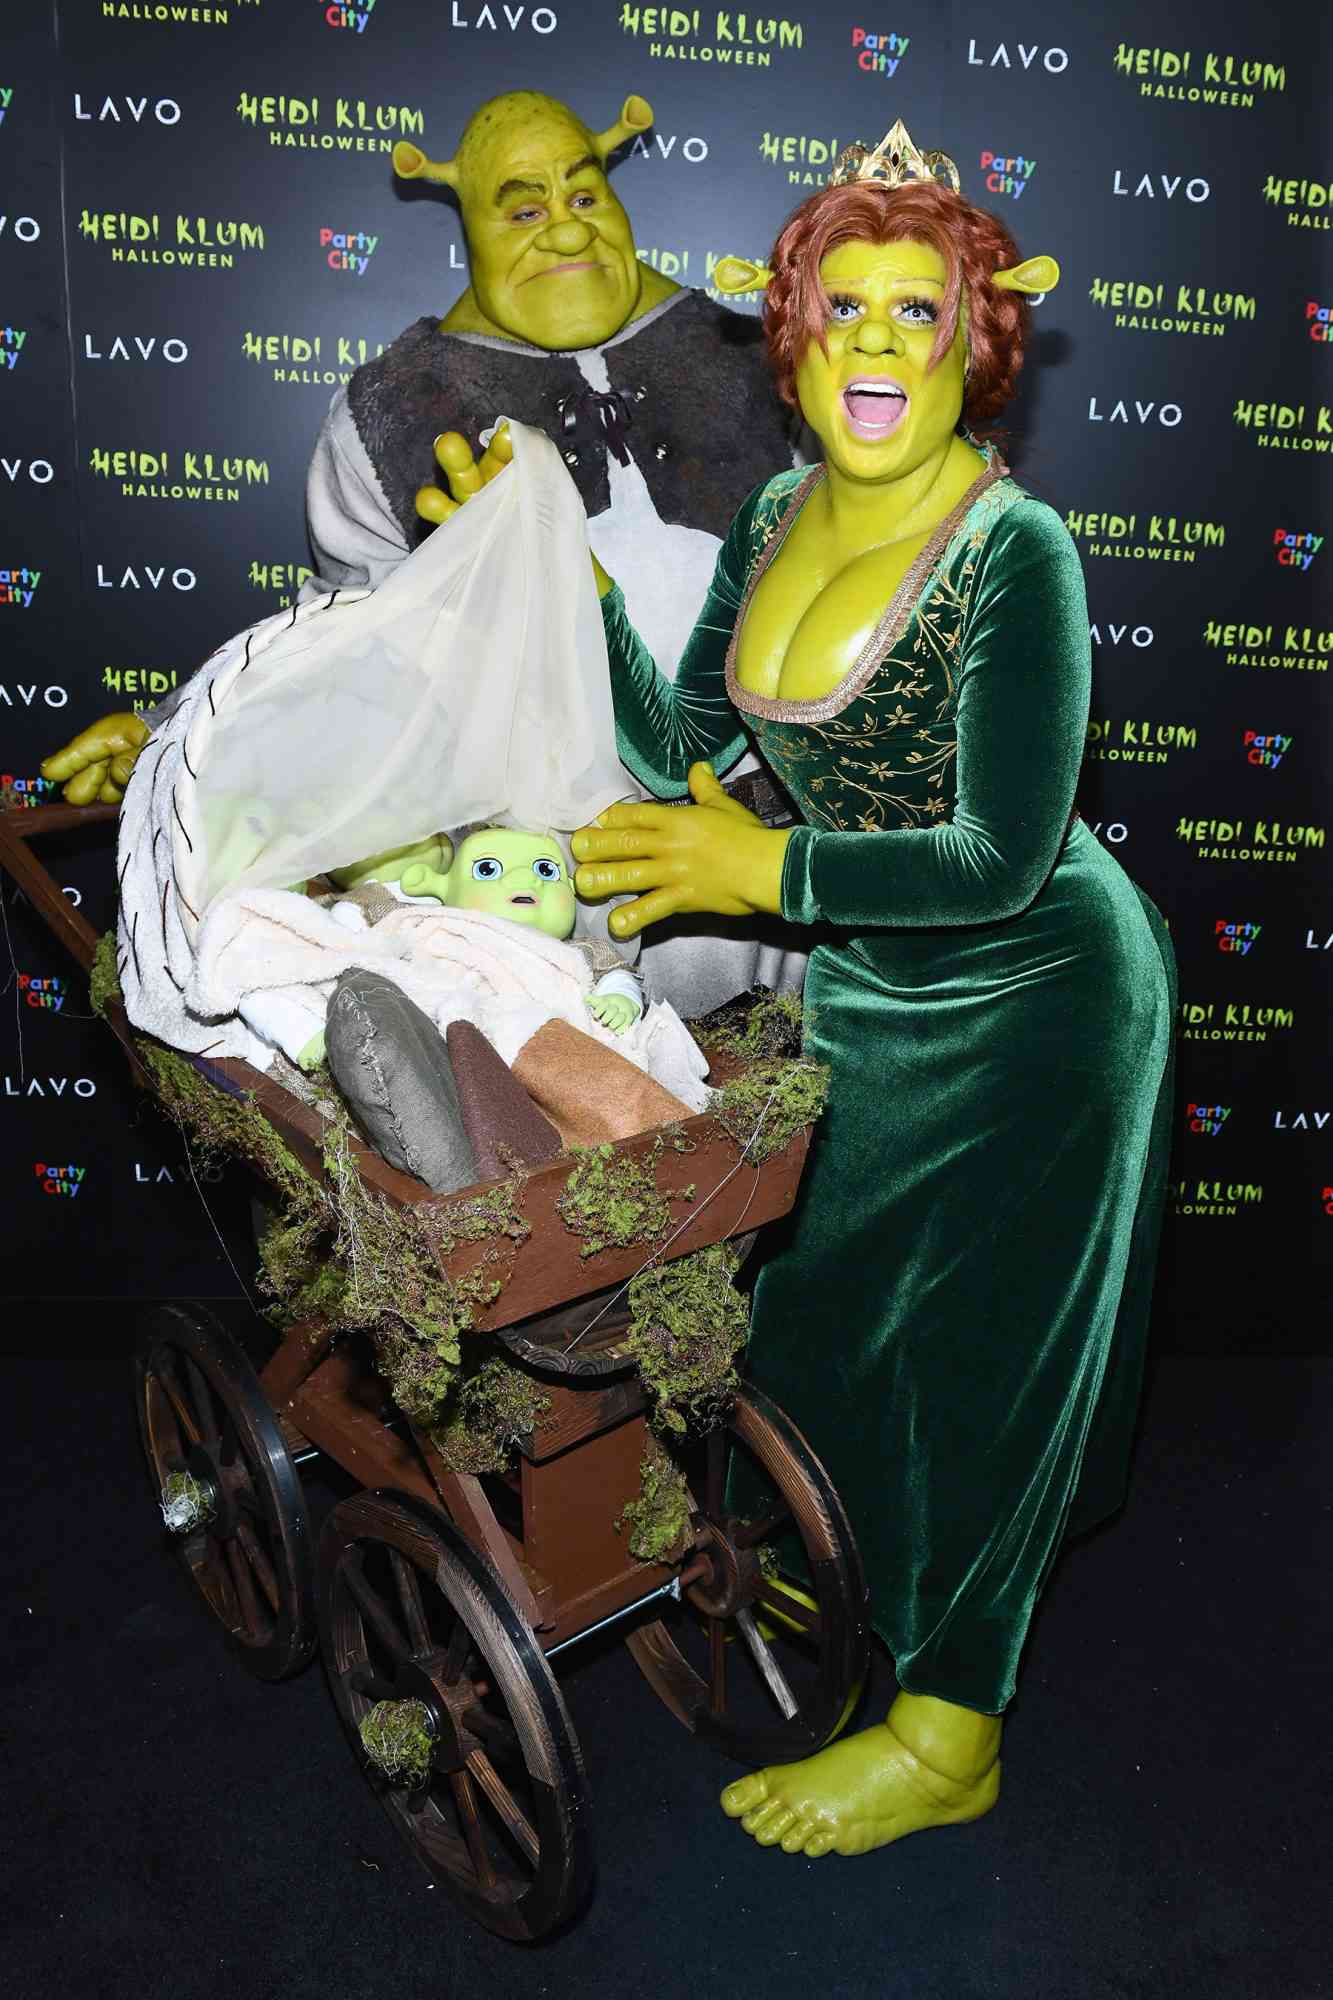 Heidi Klum's 19th Annual Halloween Party Presented By Party City And SVEDKA Vodka At LAVO New York - Arrivals